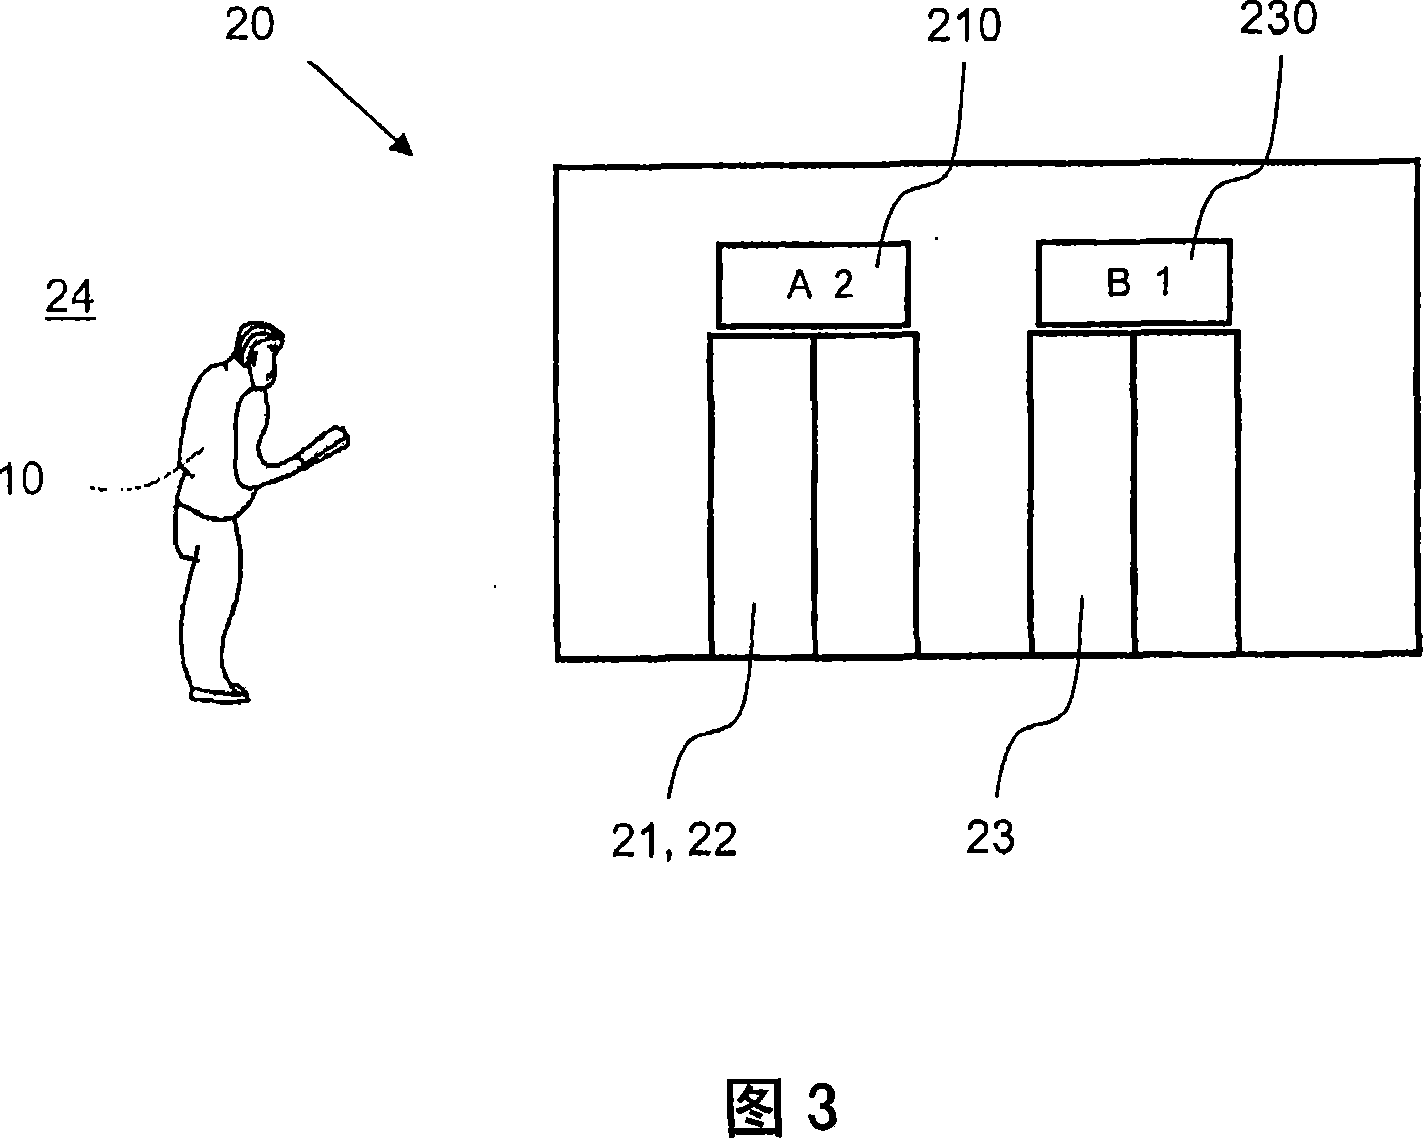 Method for assigning a user to an elevator system